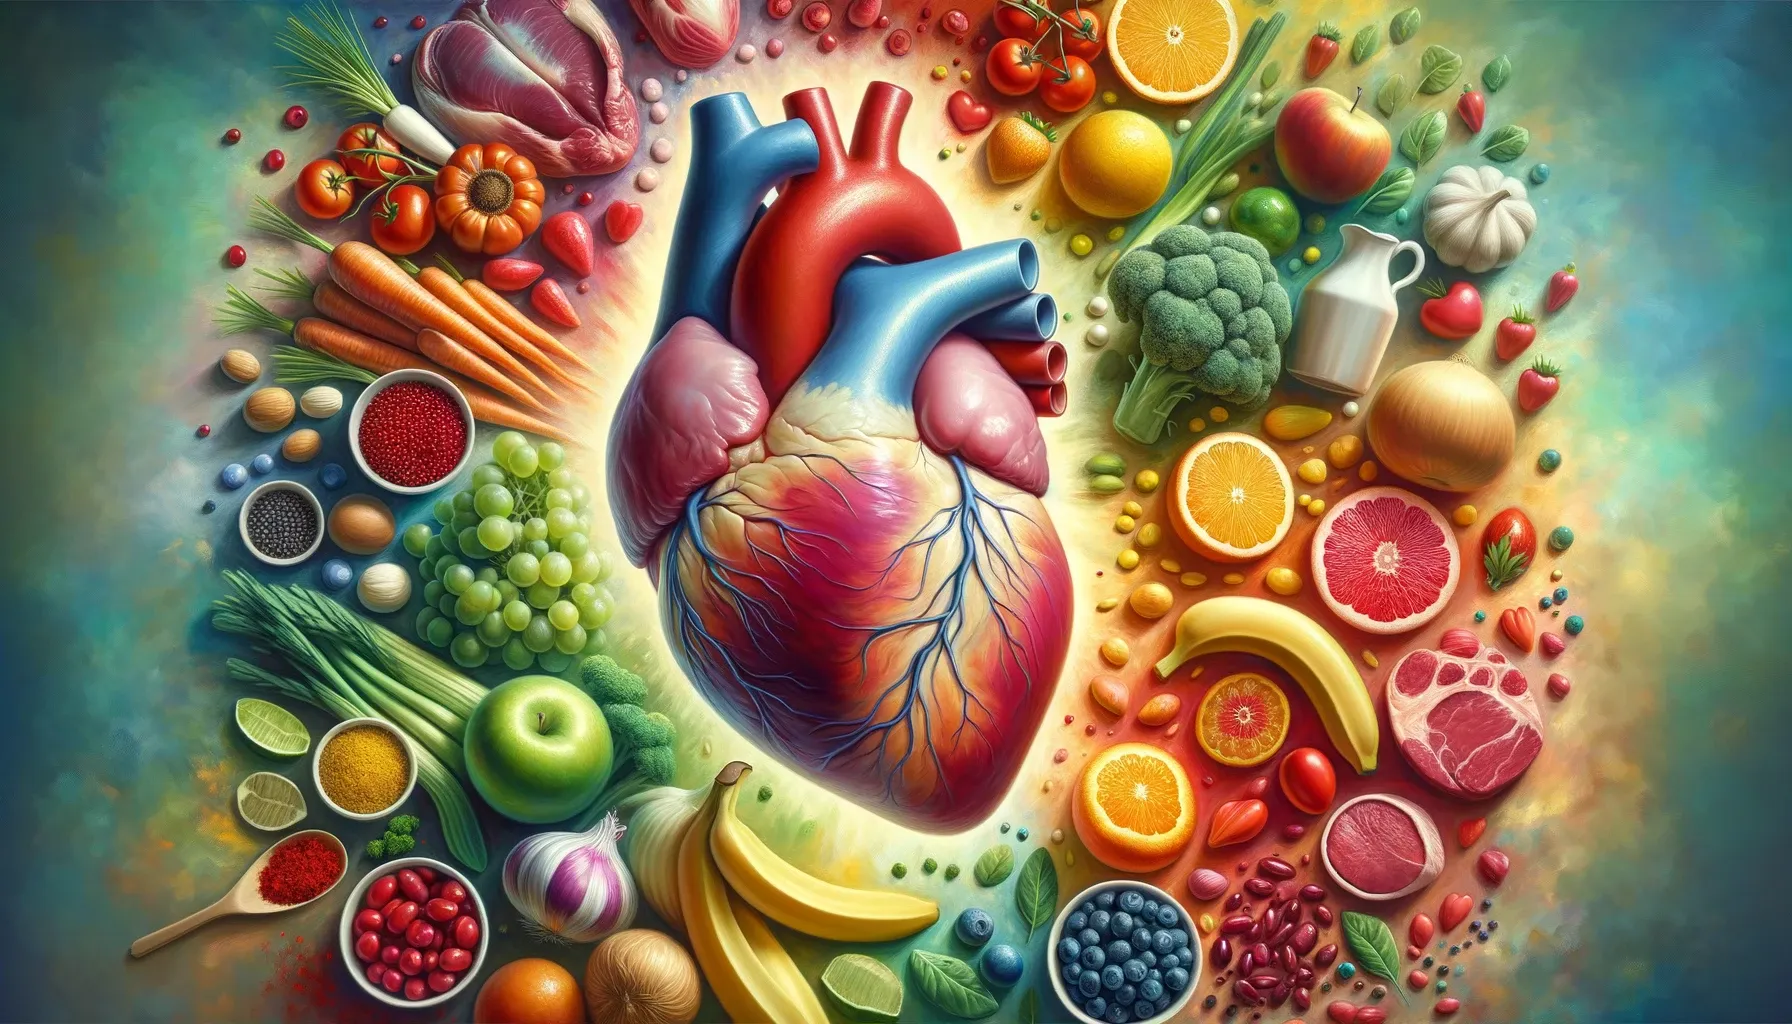 Human heart surrounded by antioxidant-rich foods.